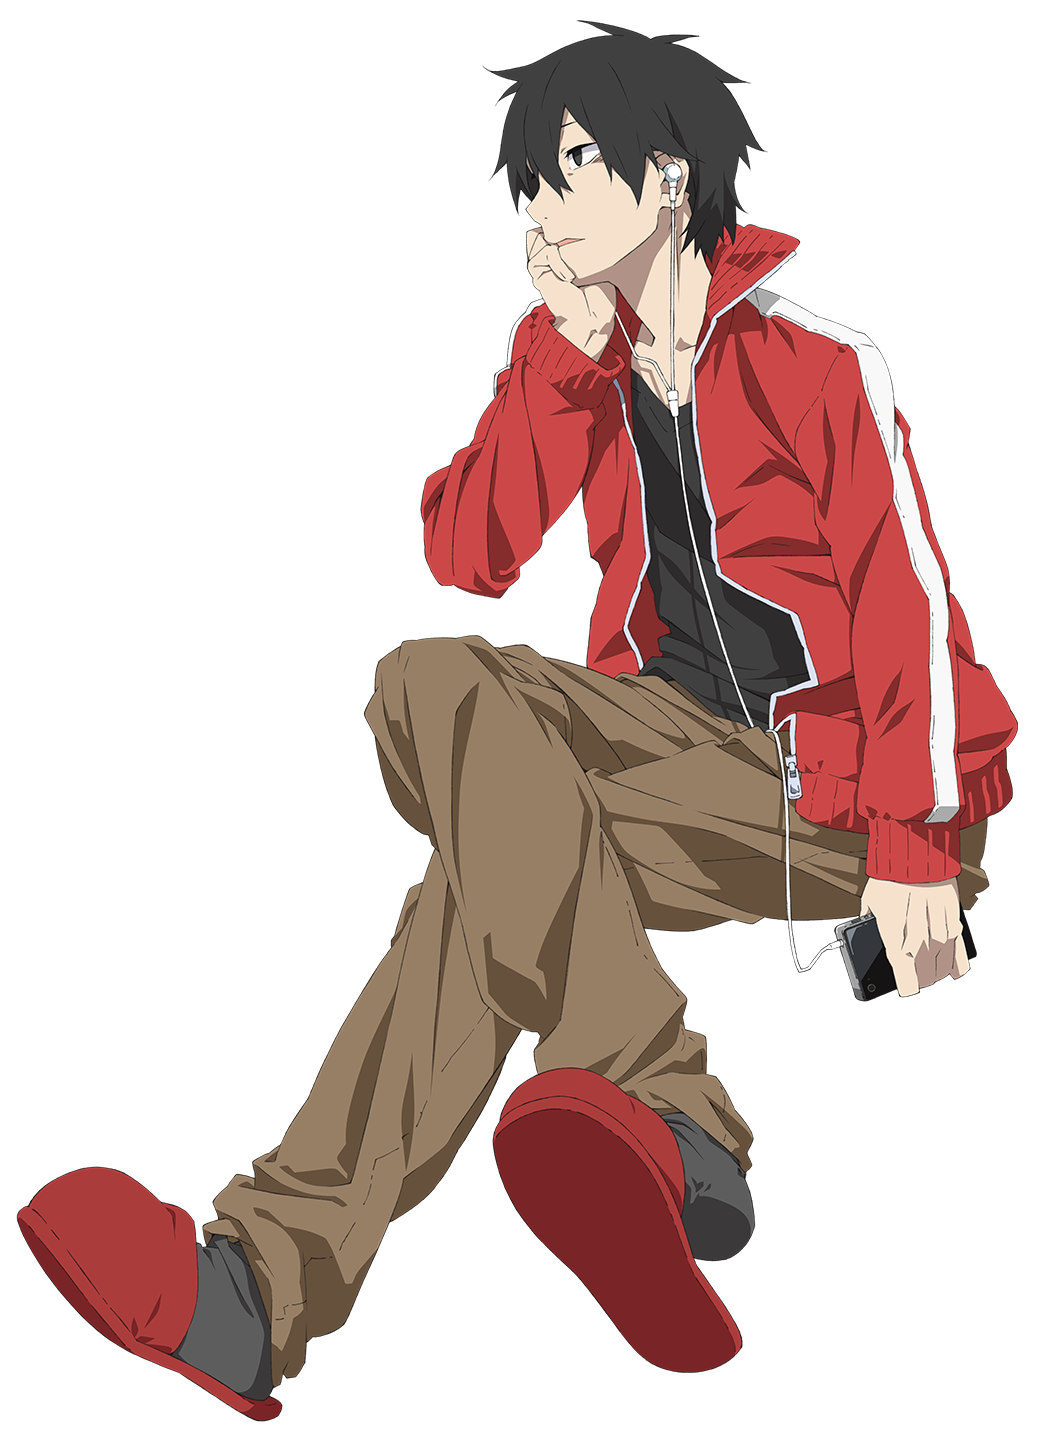 Hey PMC people i made Shintaro from the anime Mekakucity actors X3 Hes my f...